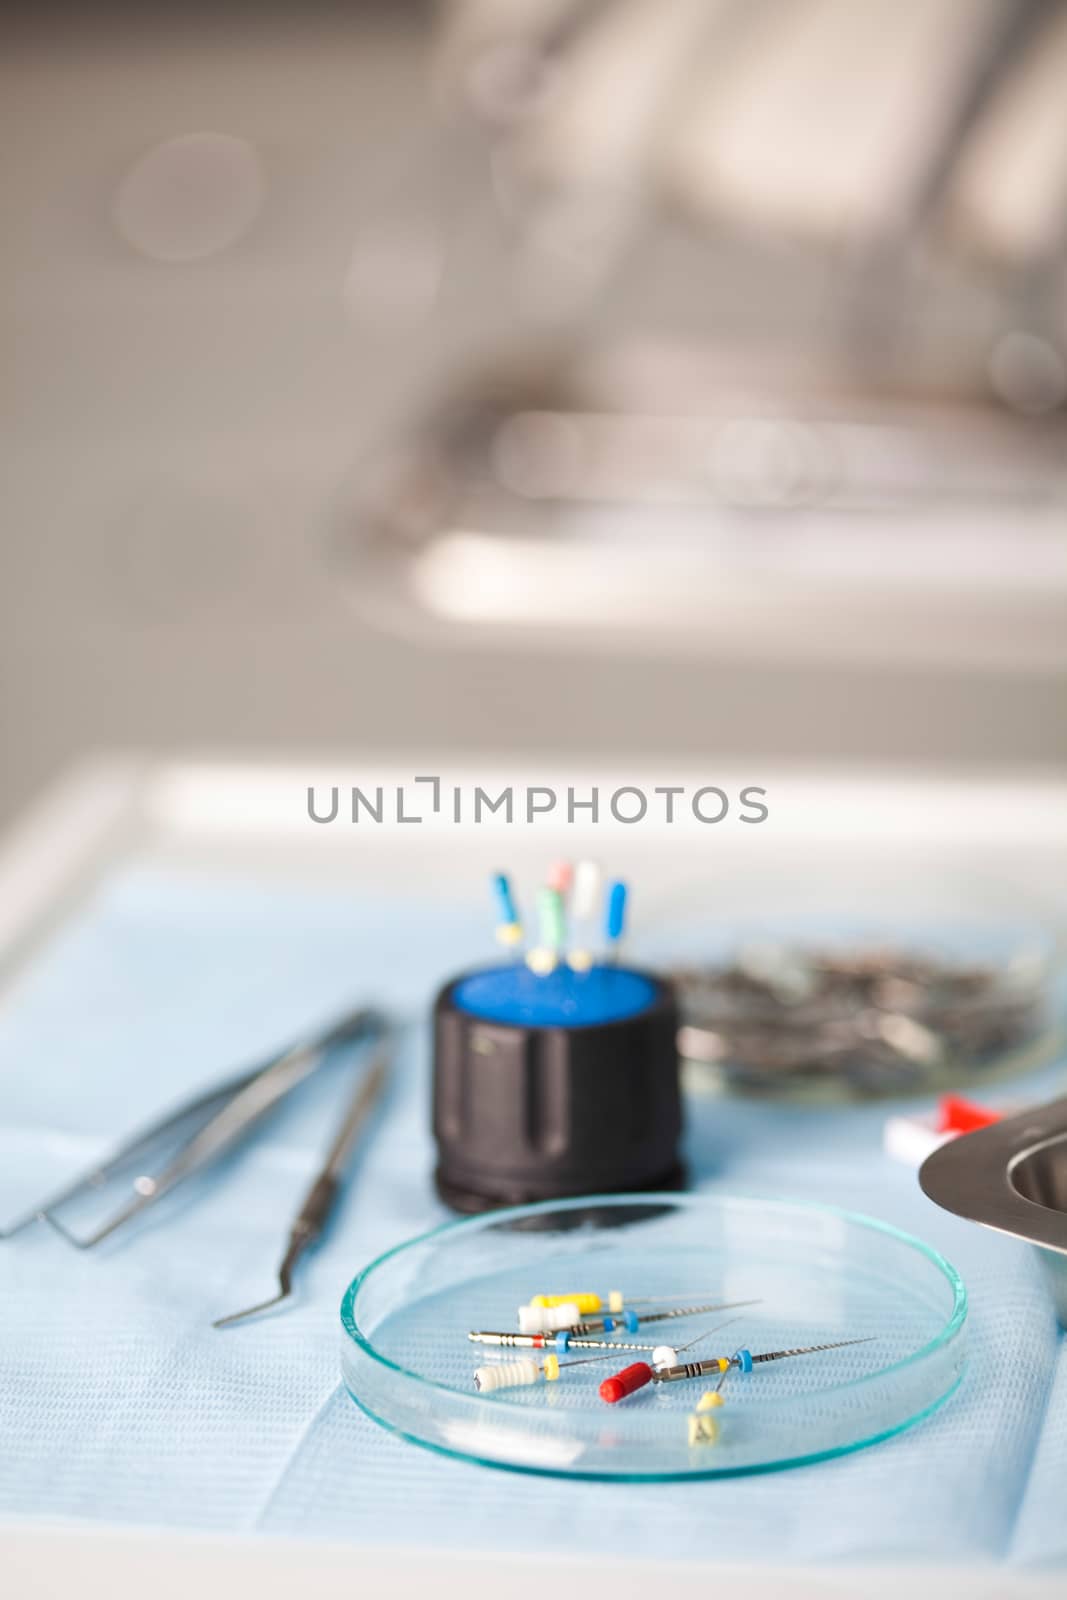 Dental tools and equipment, bright colorful tone concept